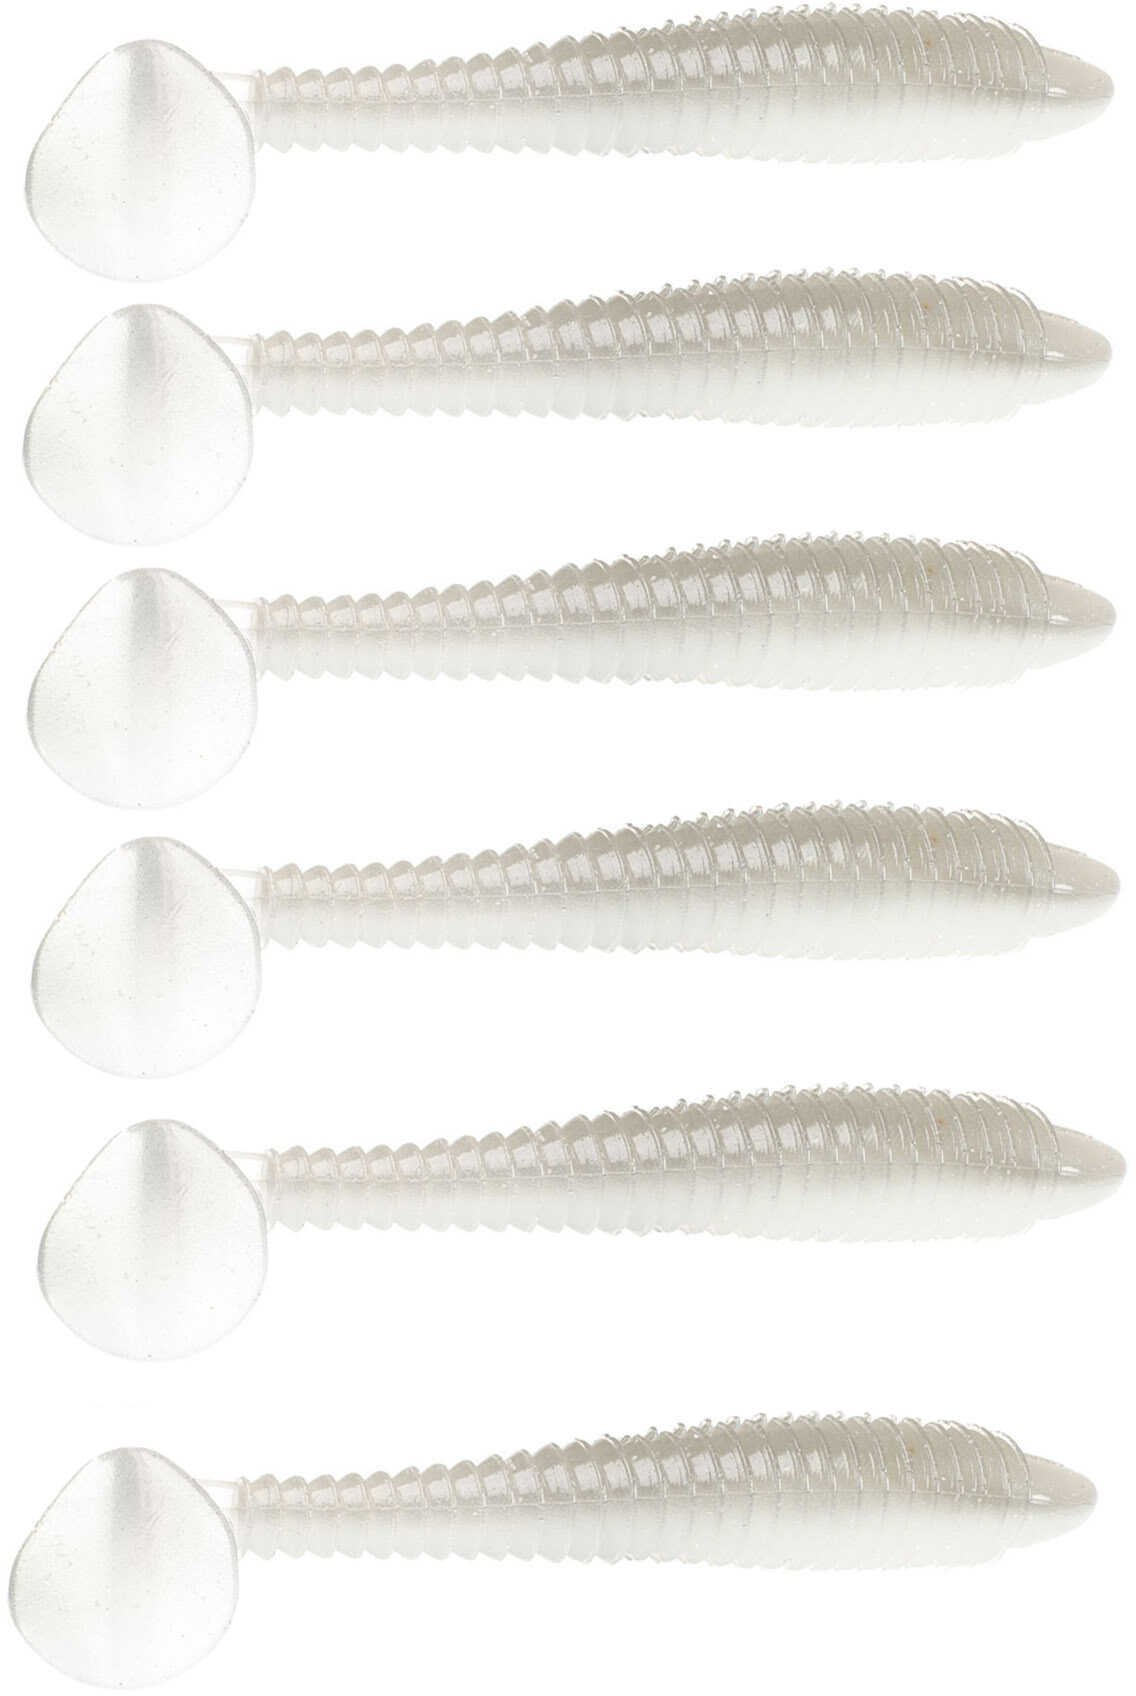 Strike King Rage Tail Swimmer 4In 6Pk Ghost Shad Model: RGSW434-151